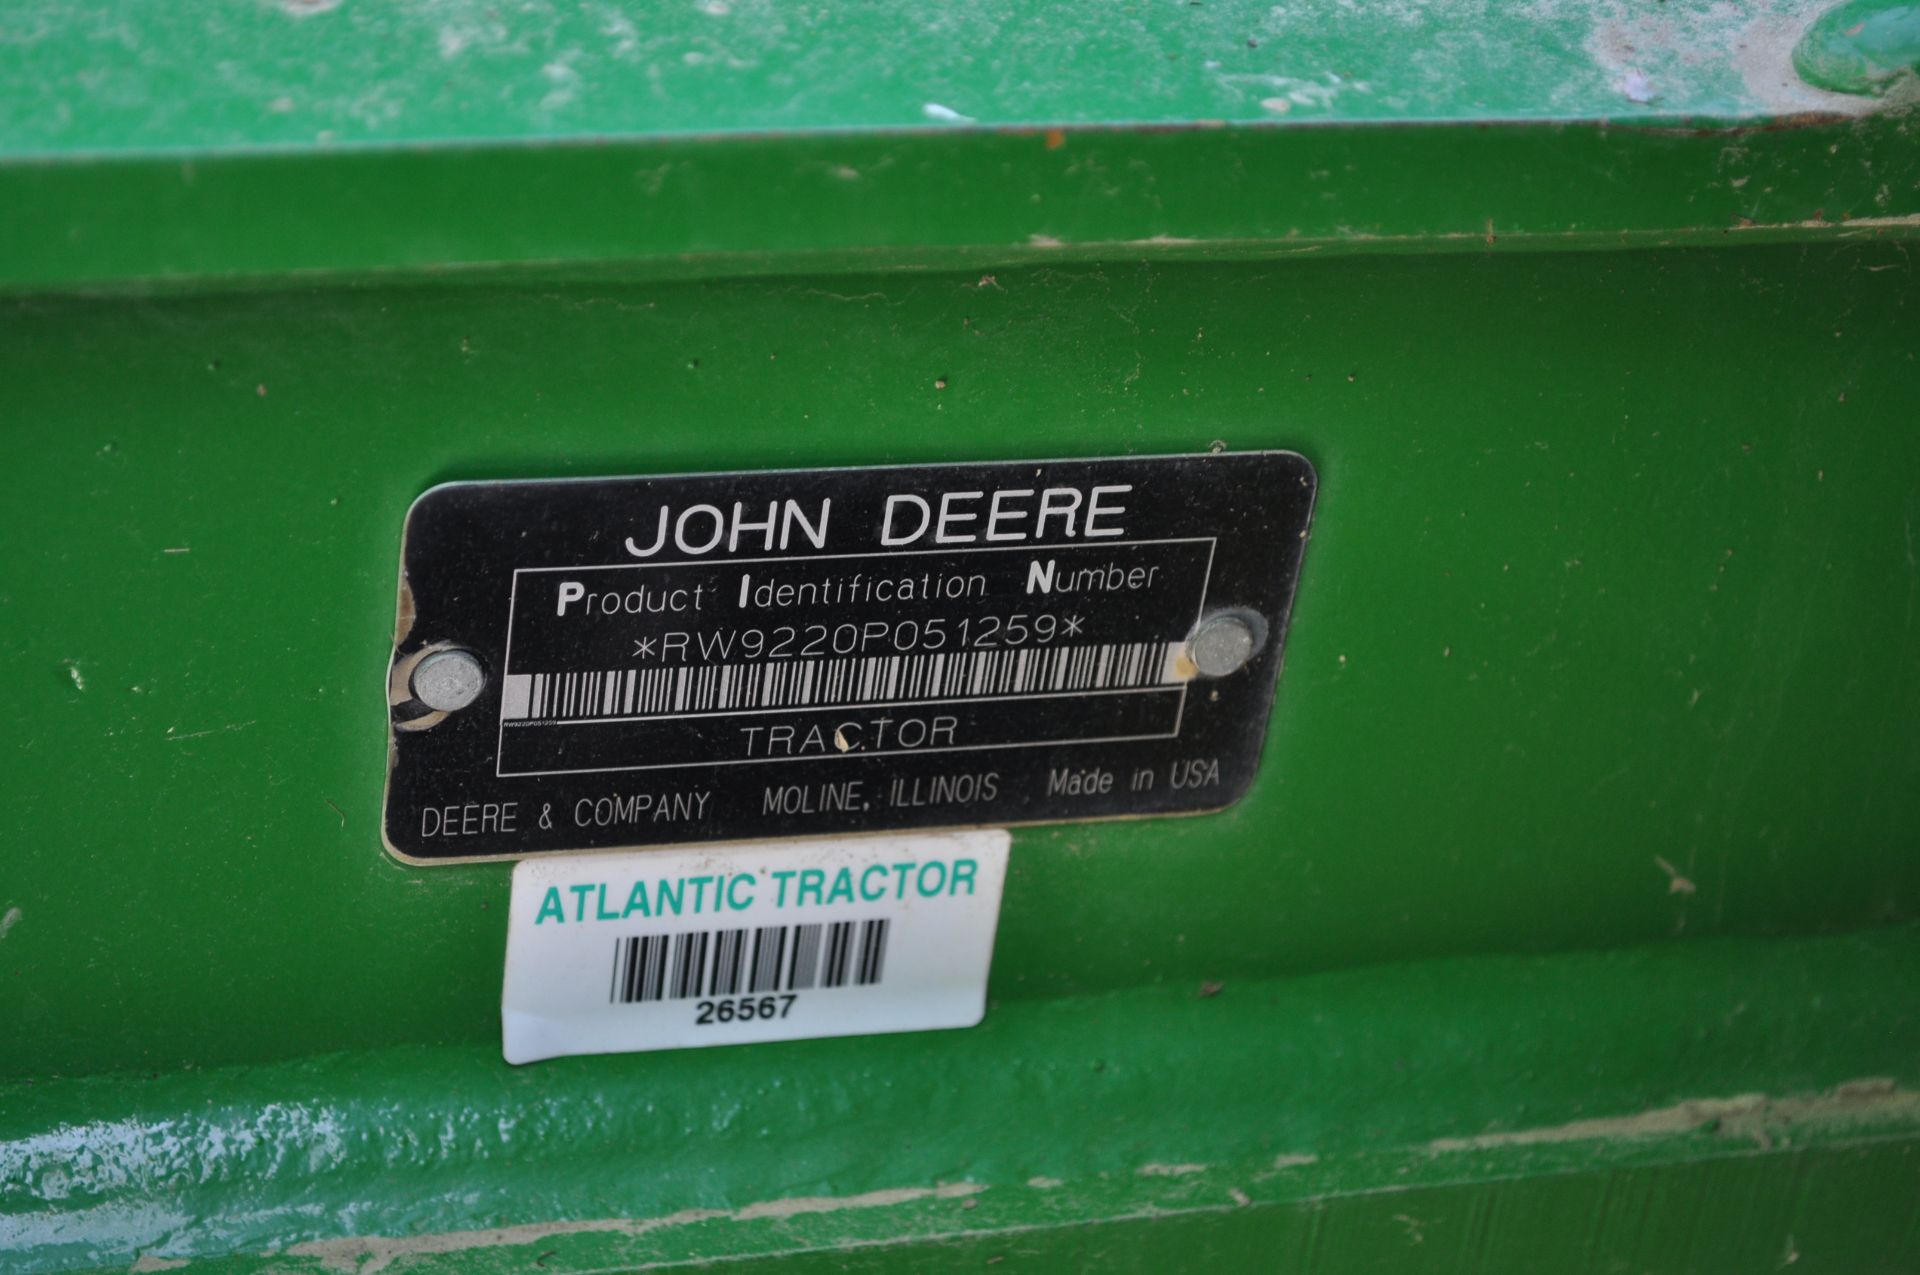 John Deere 9220 tractor, 4WD, 520/85R42 duals, power shift, rear wheel wts, 4 hyd remotes, 3pt, - Image 11 of 35